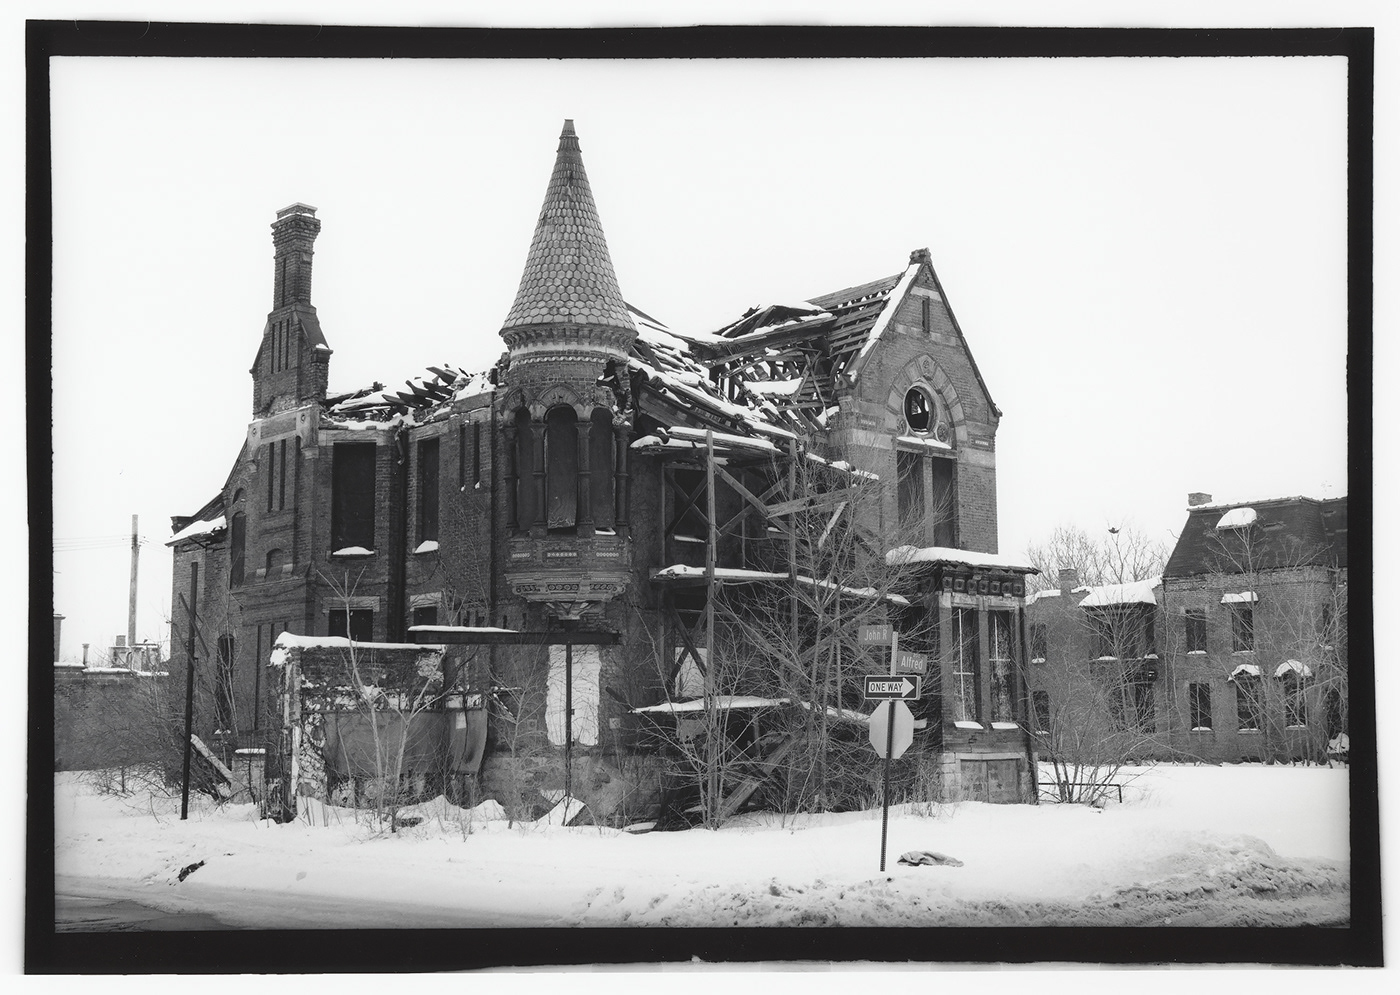 The abandoned Ransom Gillis house, in Detroit, Michigan.